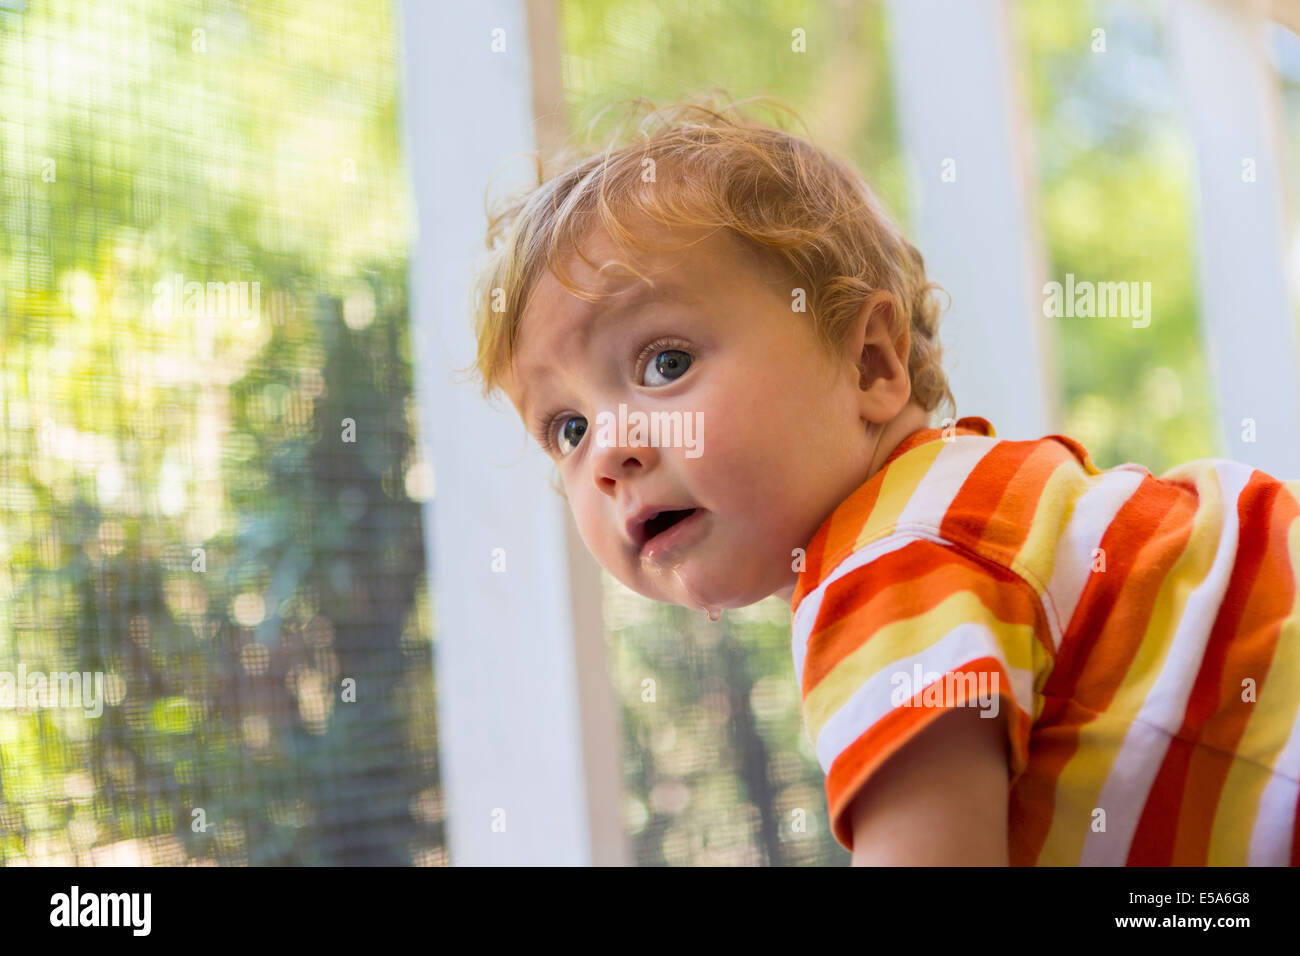 Caucasian toddler peering out screen fence Stock Photo